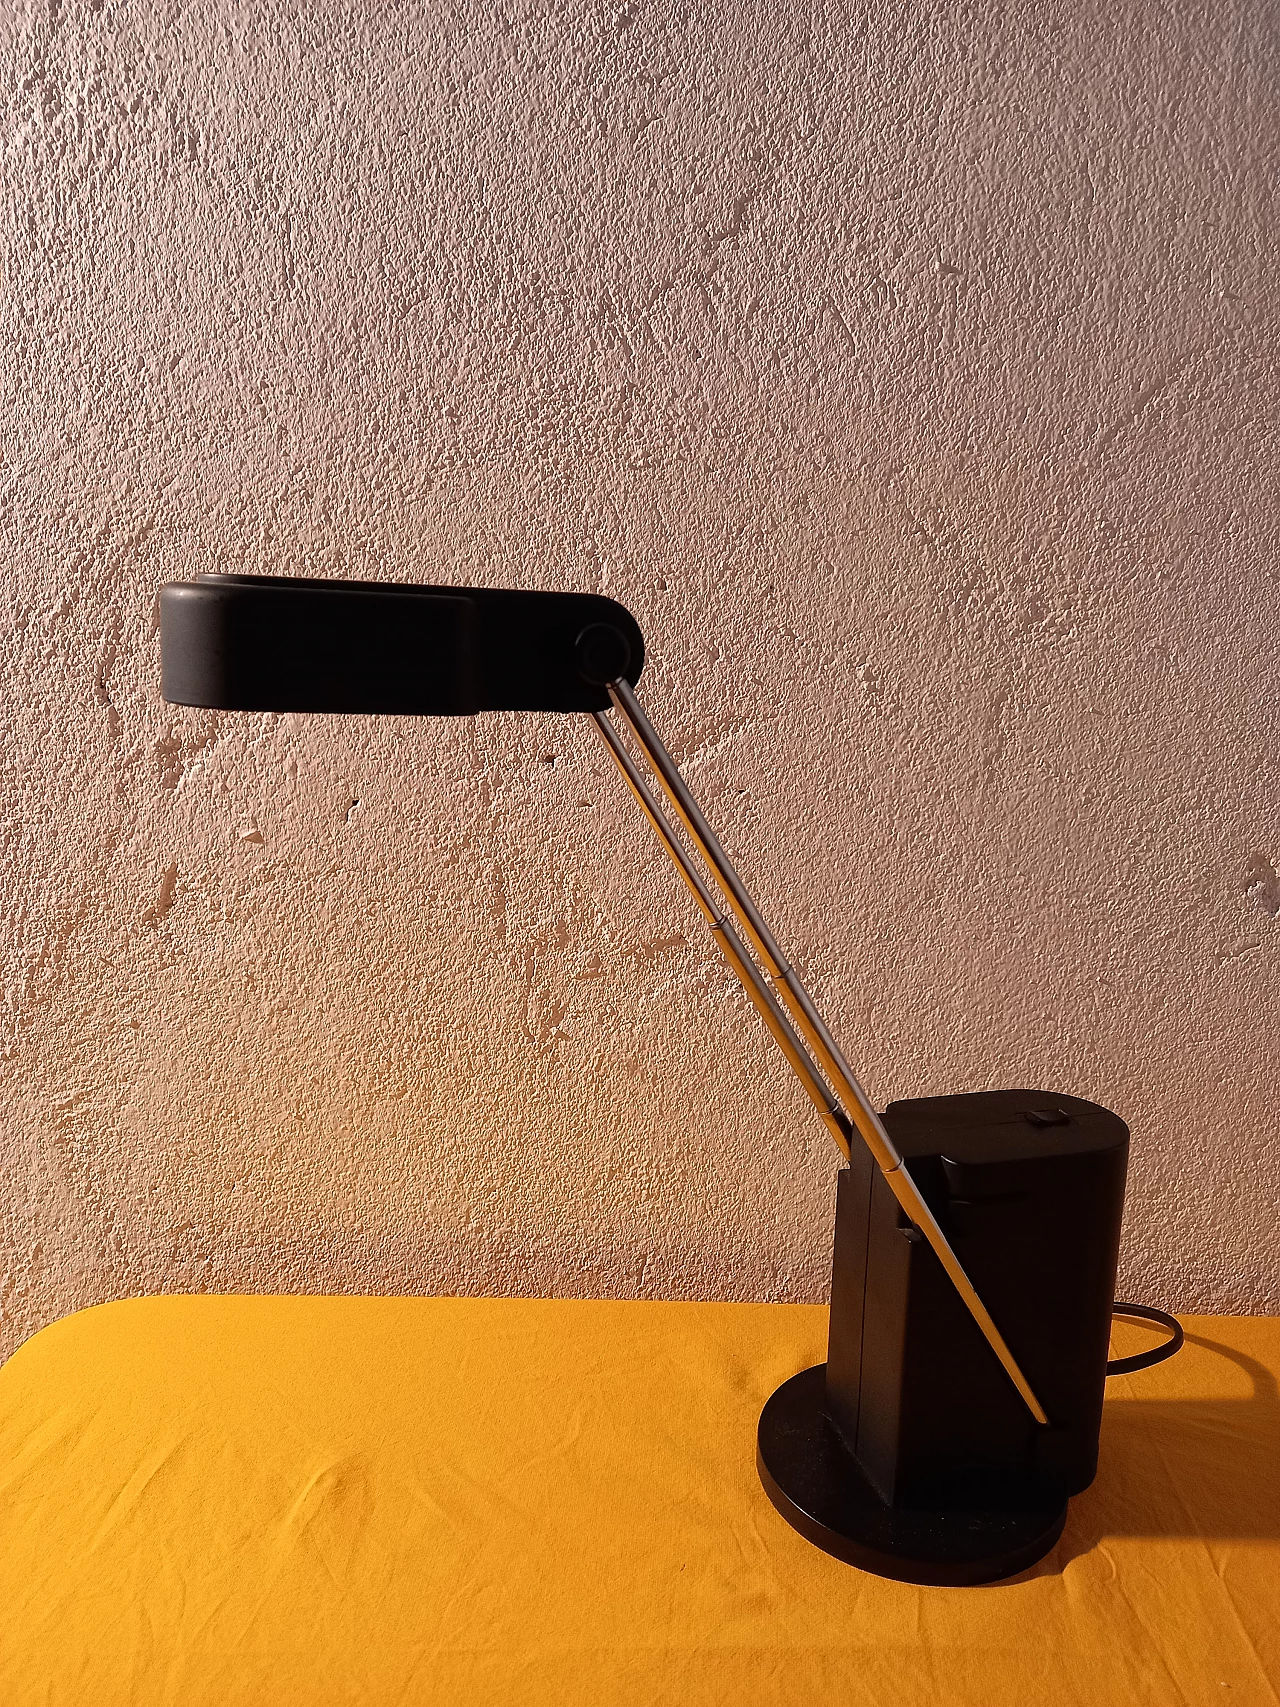 Clara table lamp by Gianni Cardile for Valenti, 1980s 2